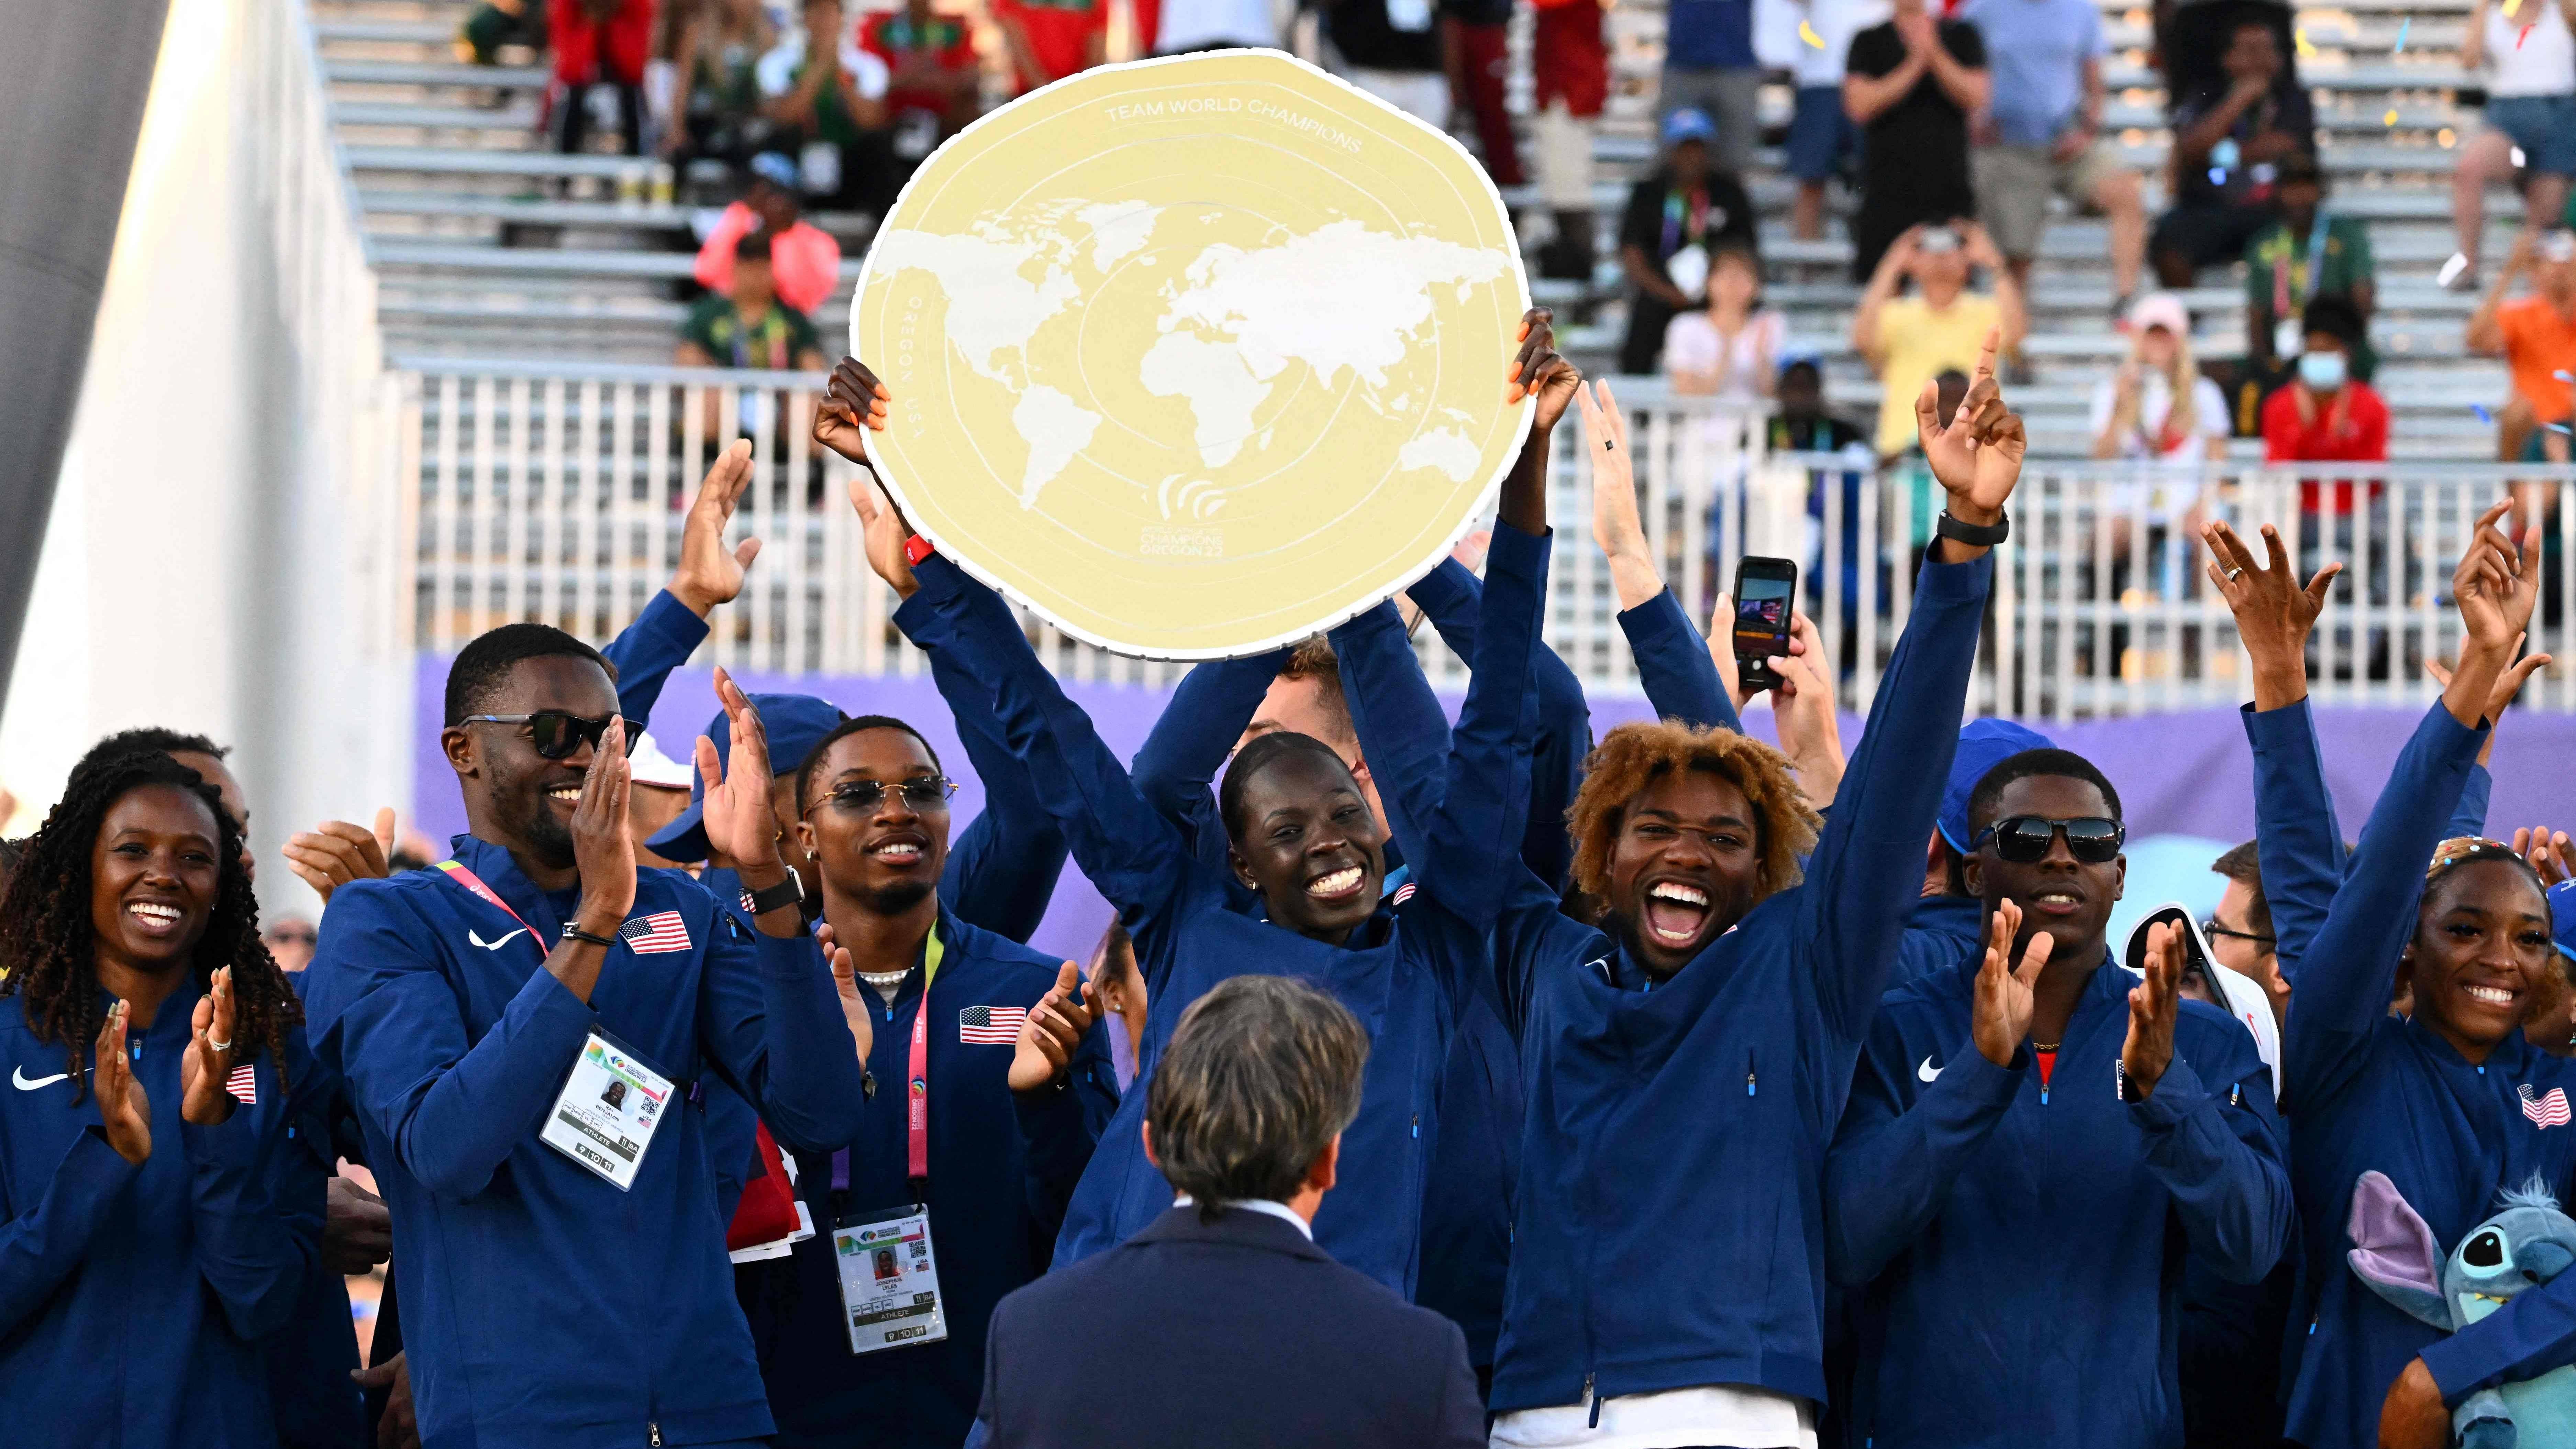 The United States wrapped up the championships by consolidating their place at the top of the medals table with a championship record 33 medals. Credit: AFP photo 